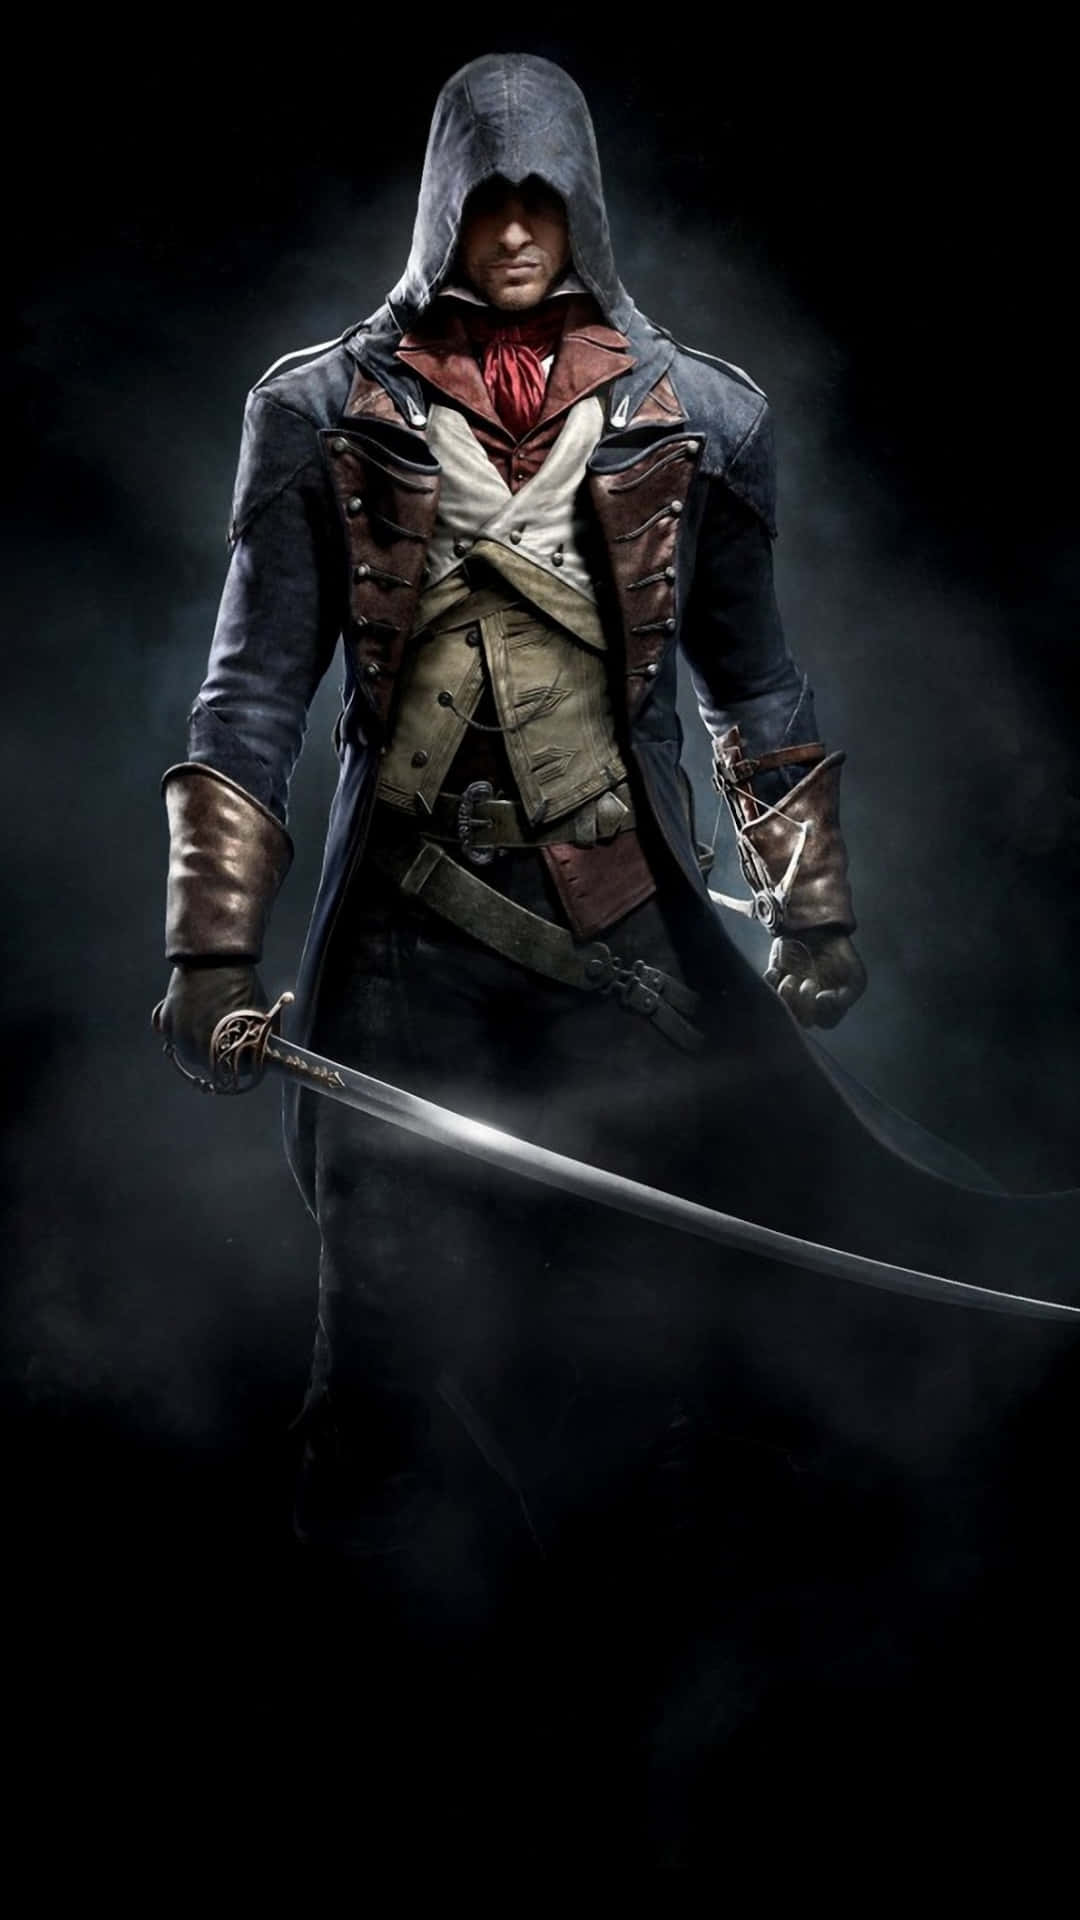 Experience the Assassins Creed world on your iPhone Wallpaper